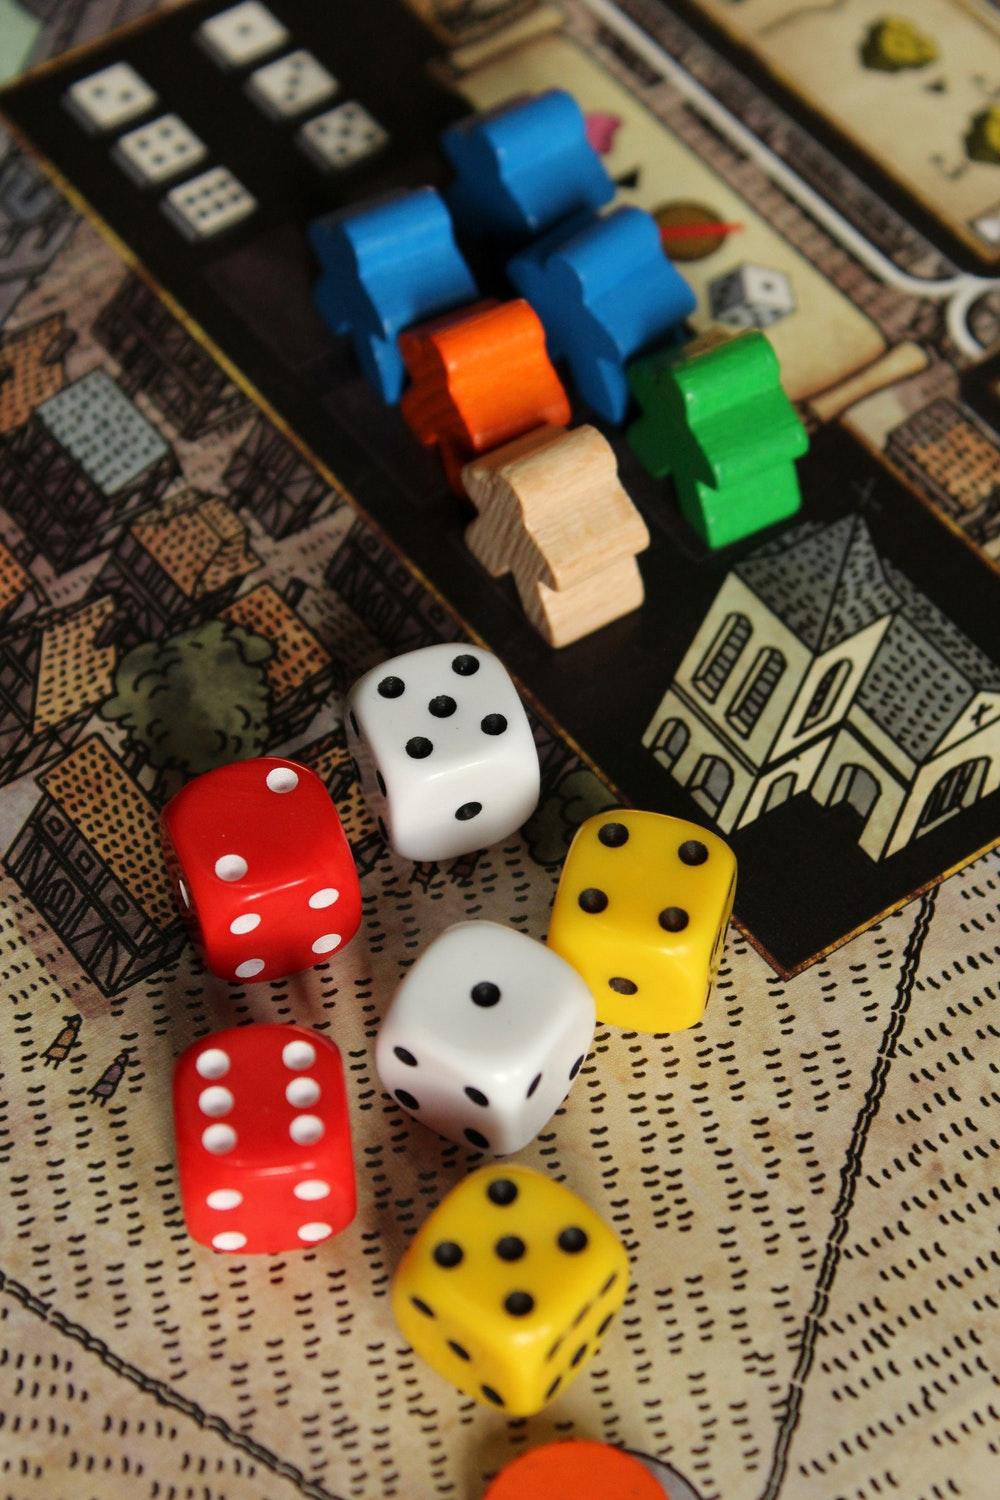 Board Games Picture. Download Free Image